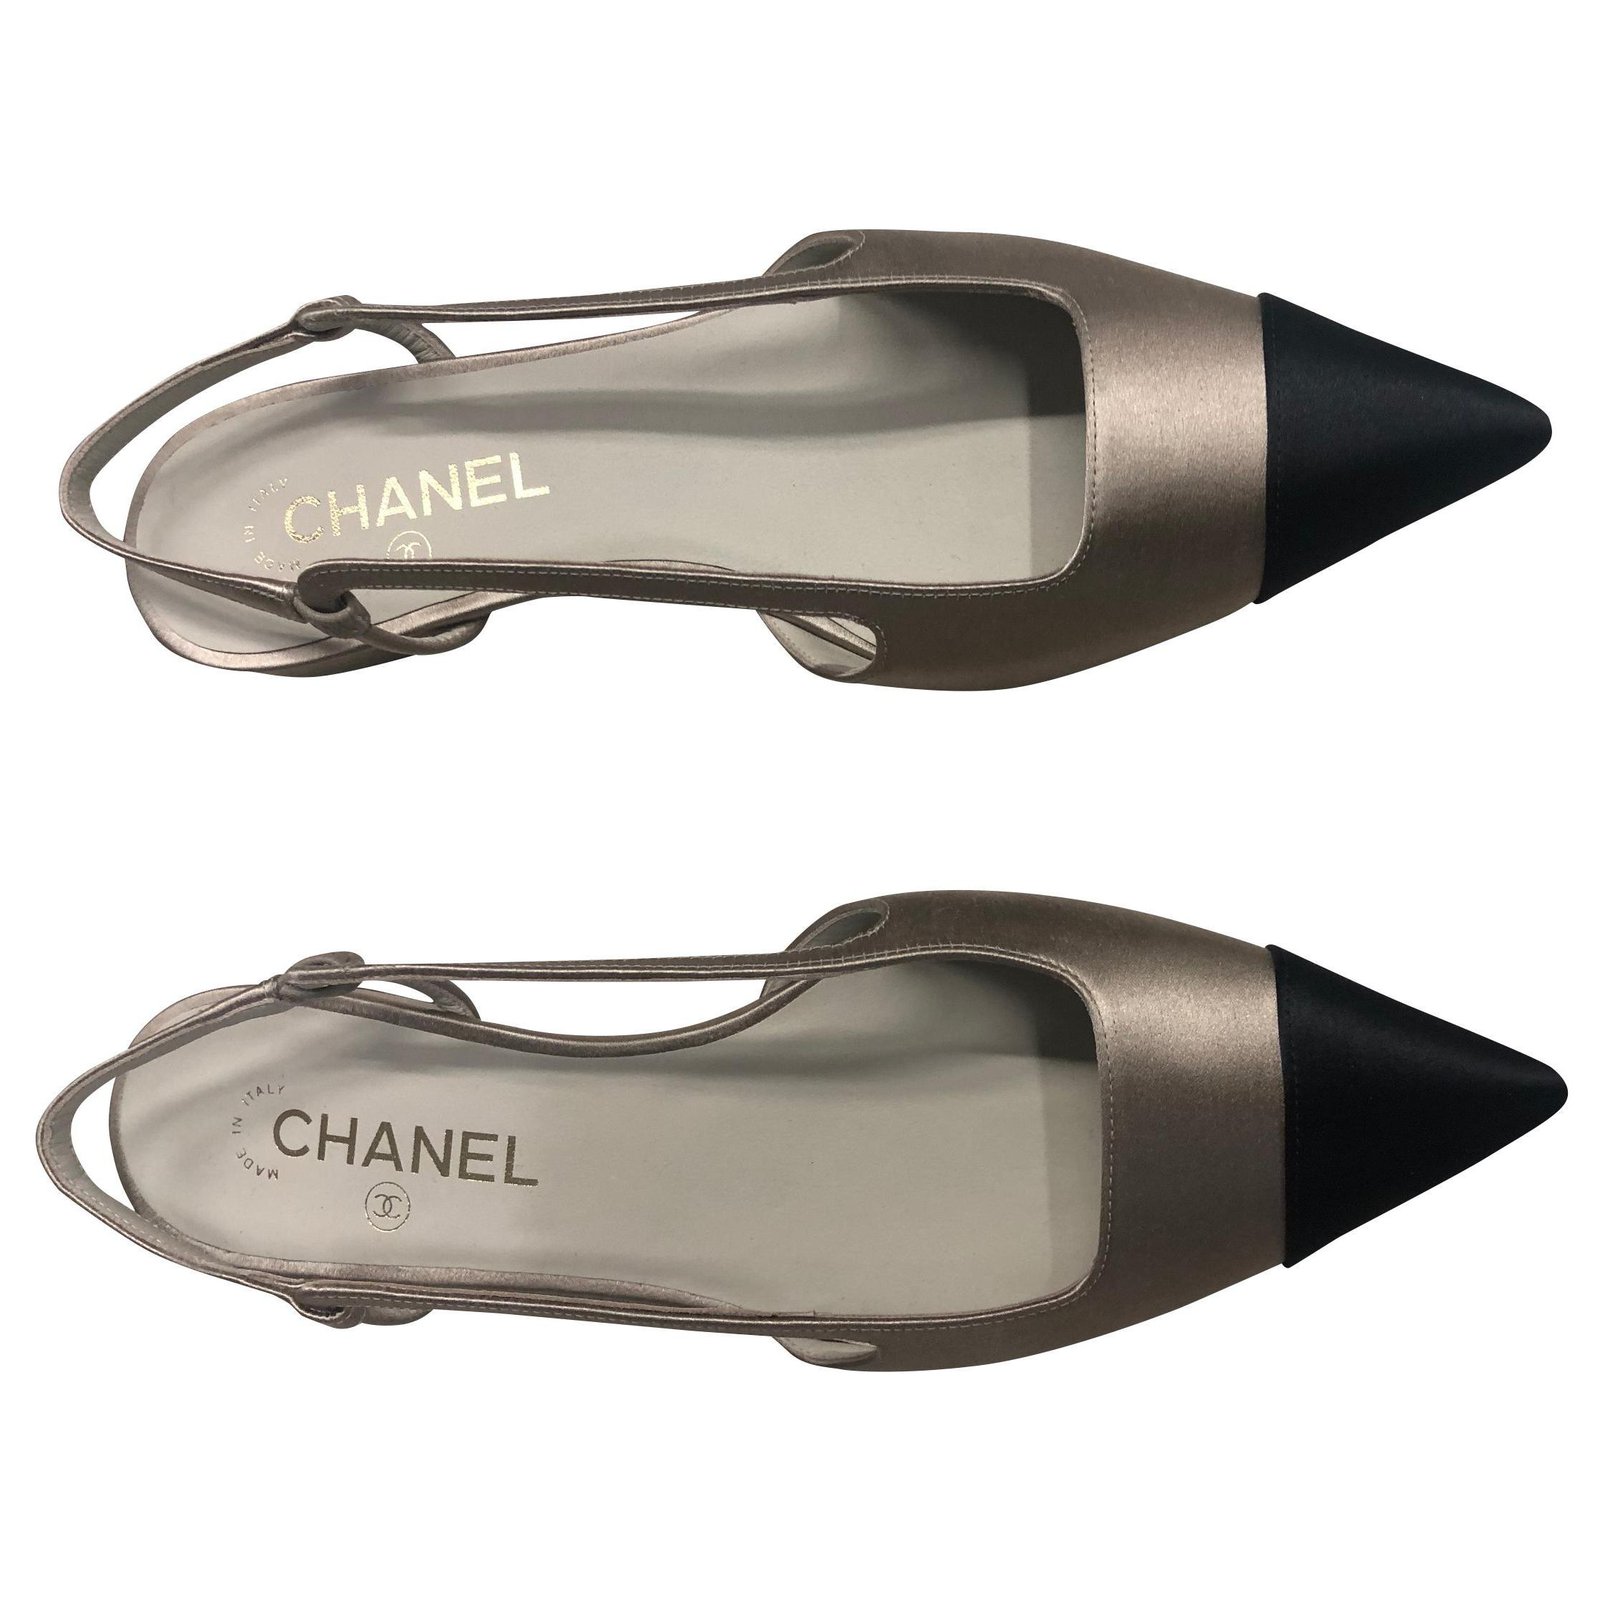 Slingback leather ballet flats Chanel Beige size 37.5 EU in Leather -  36521244